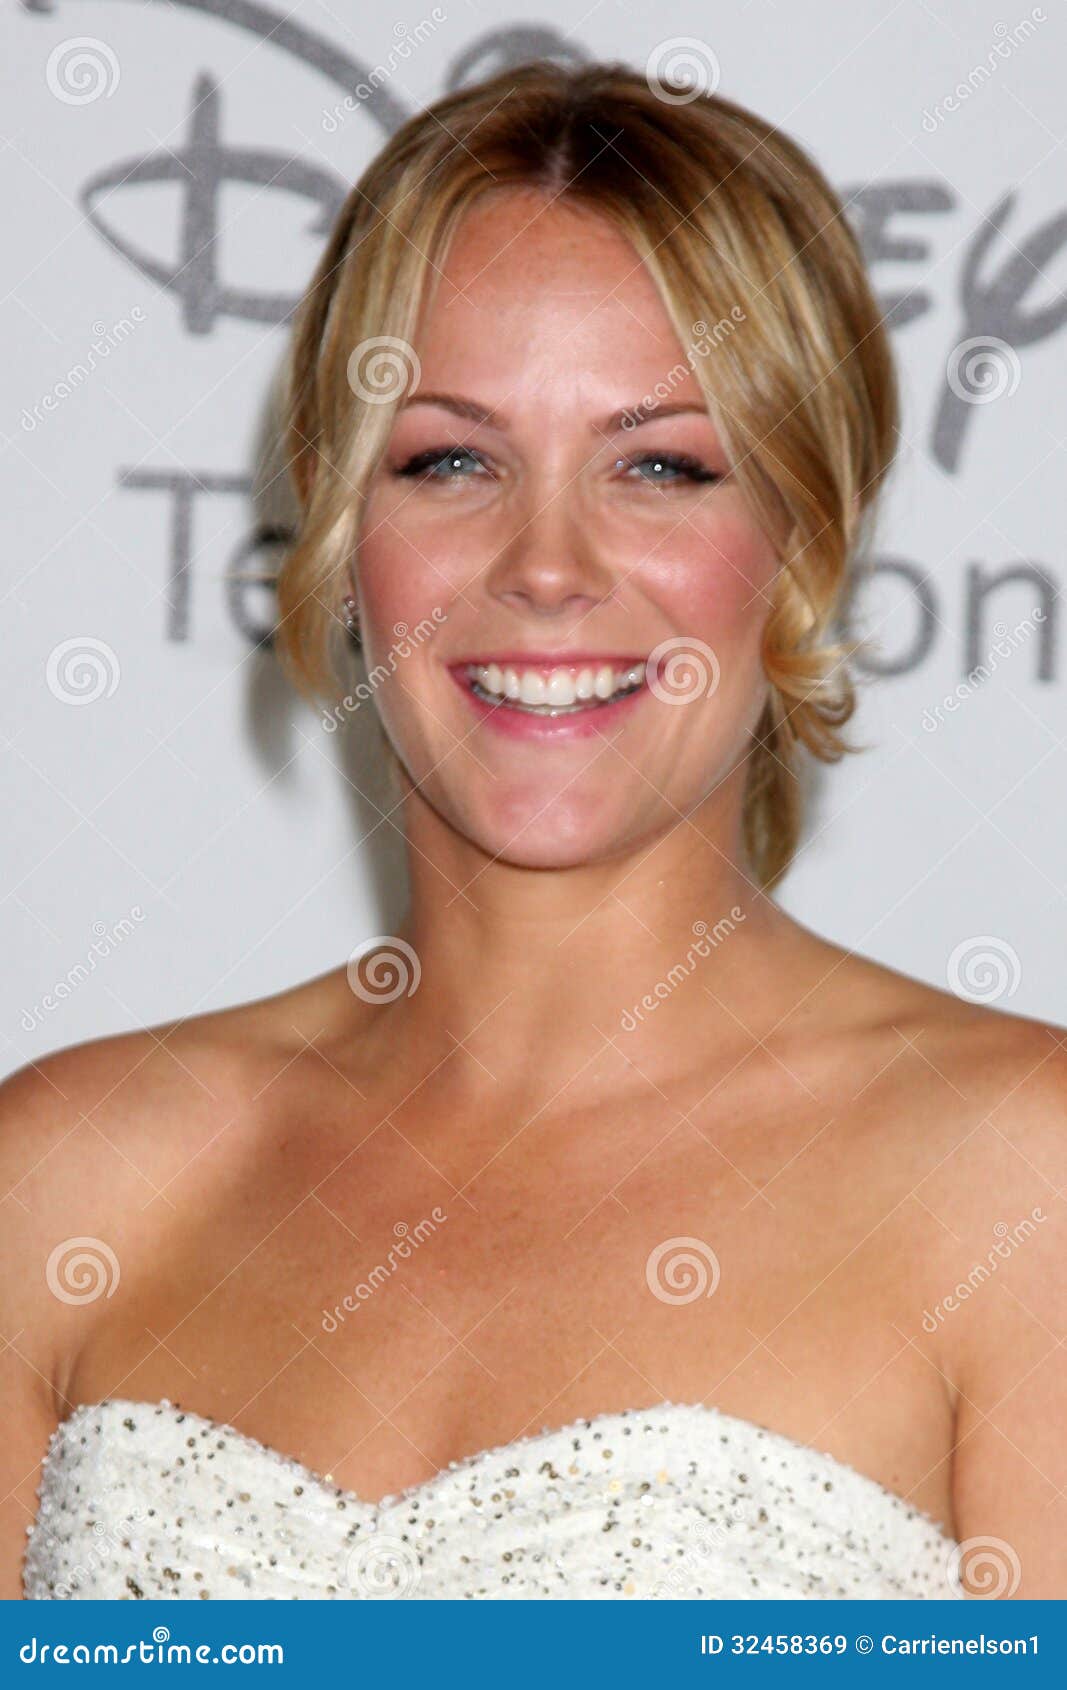 Photo andrea anders Andrea Anders